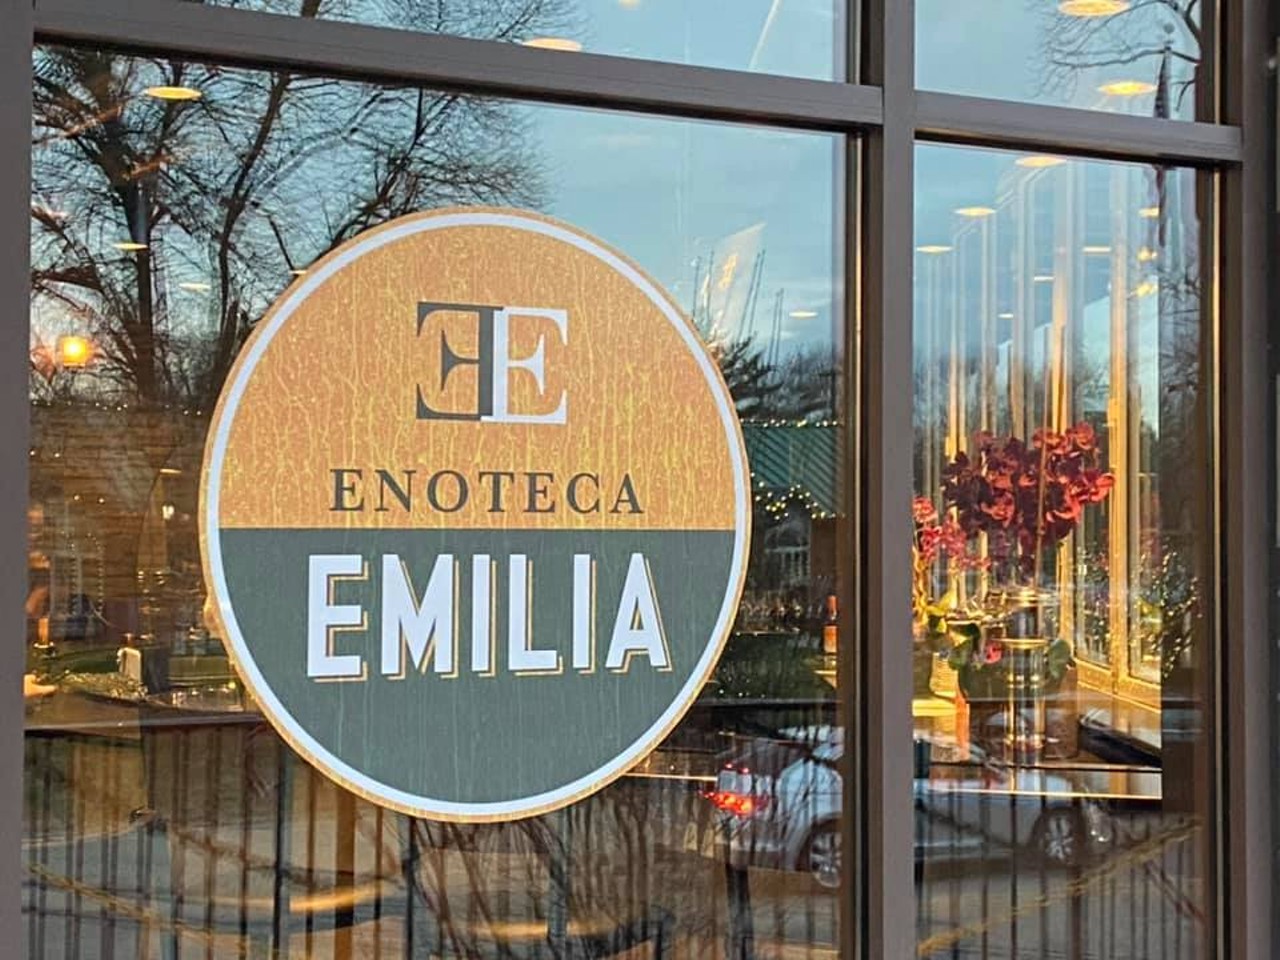 23. Enoteca Emilia
110 S. Second St., Loveland
"We were greeted by none other than the beautiful owner - and the food + bartender (Cory) + server (Porter) were absolutely flawless! Kudos to the kitchen- every bite was delicious and unique especially the veal meatballs!!! Awesome atmosphere and service!" — Tami W.